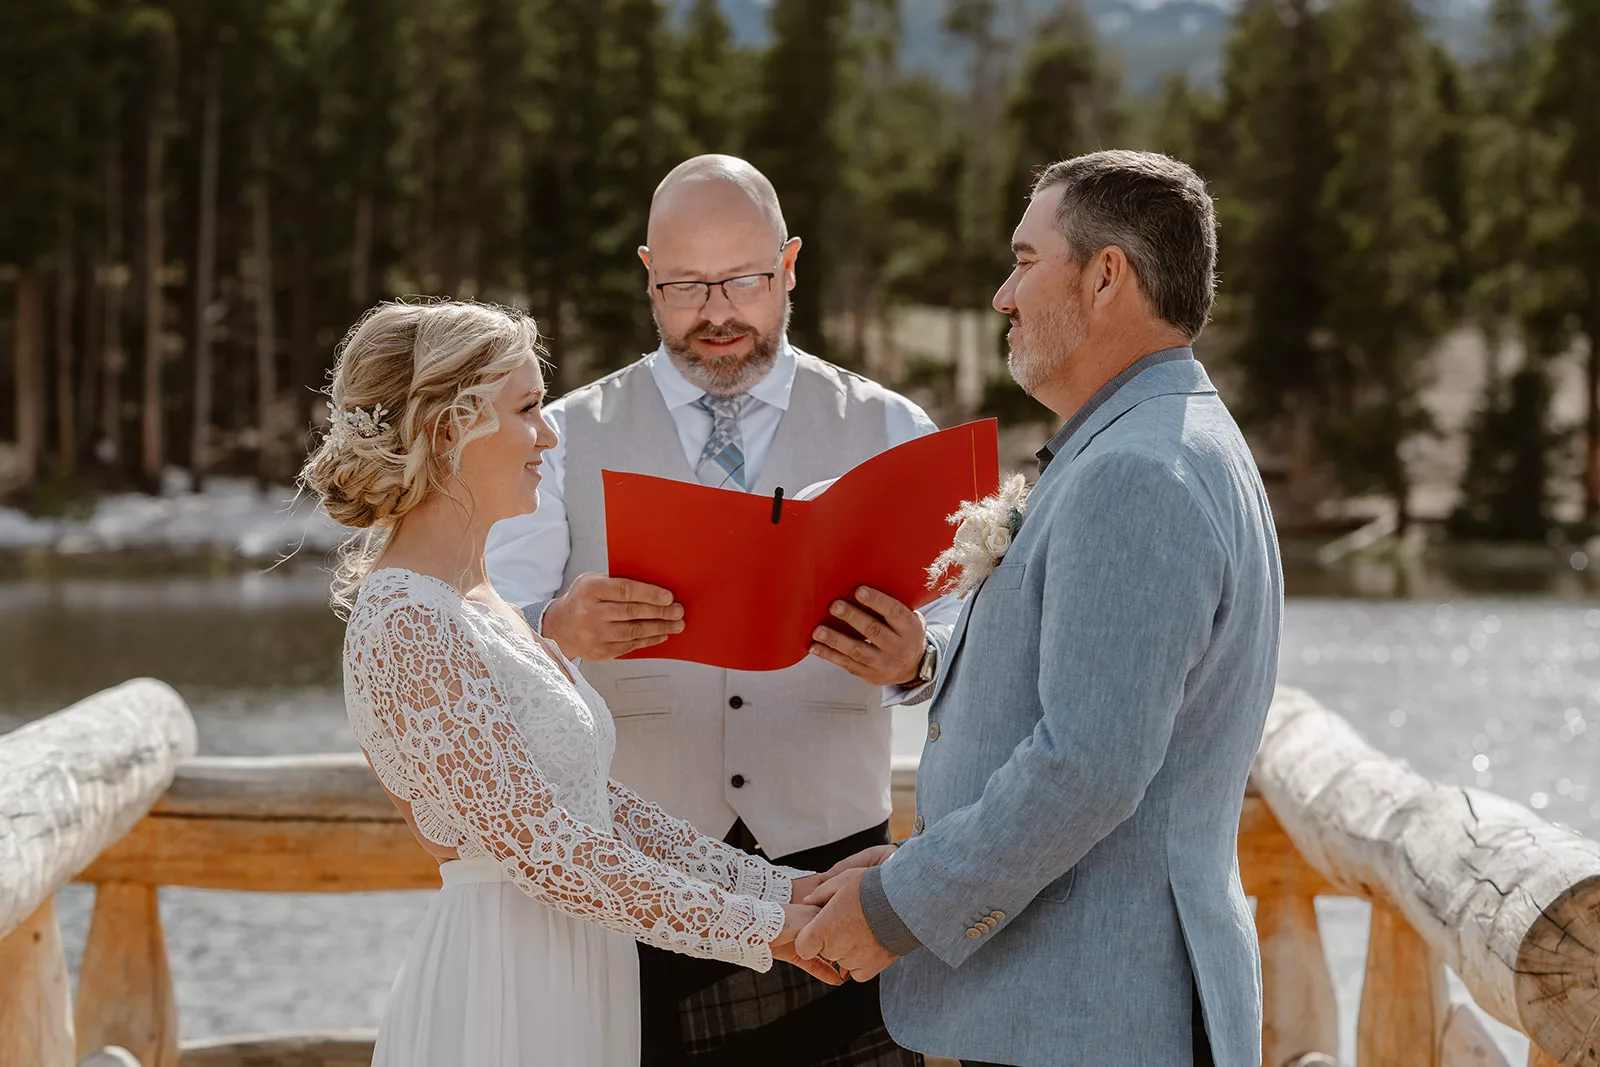 An officiant walks a couple through their elopement day, leading their ceremony.